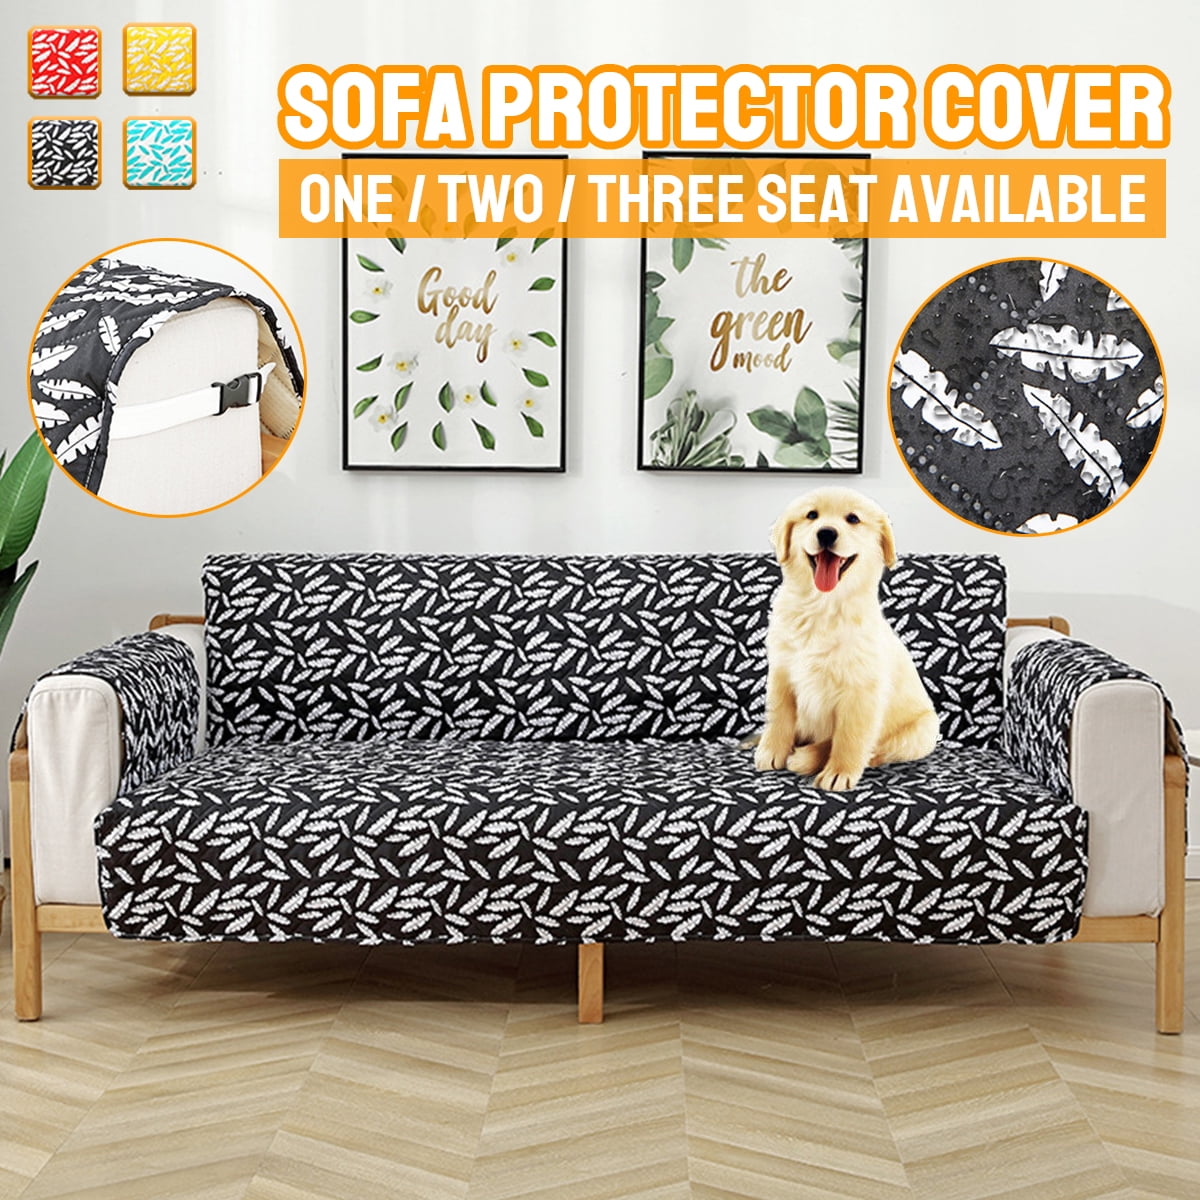 Waterproof Sofa Cover Chair Couch Slipcover Pet Dog Kids Mat Furniture Protector 